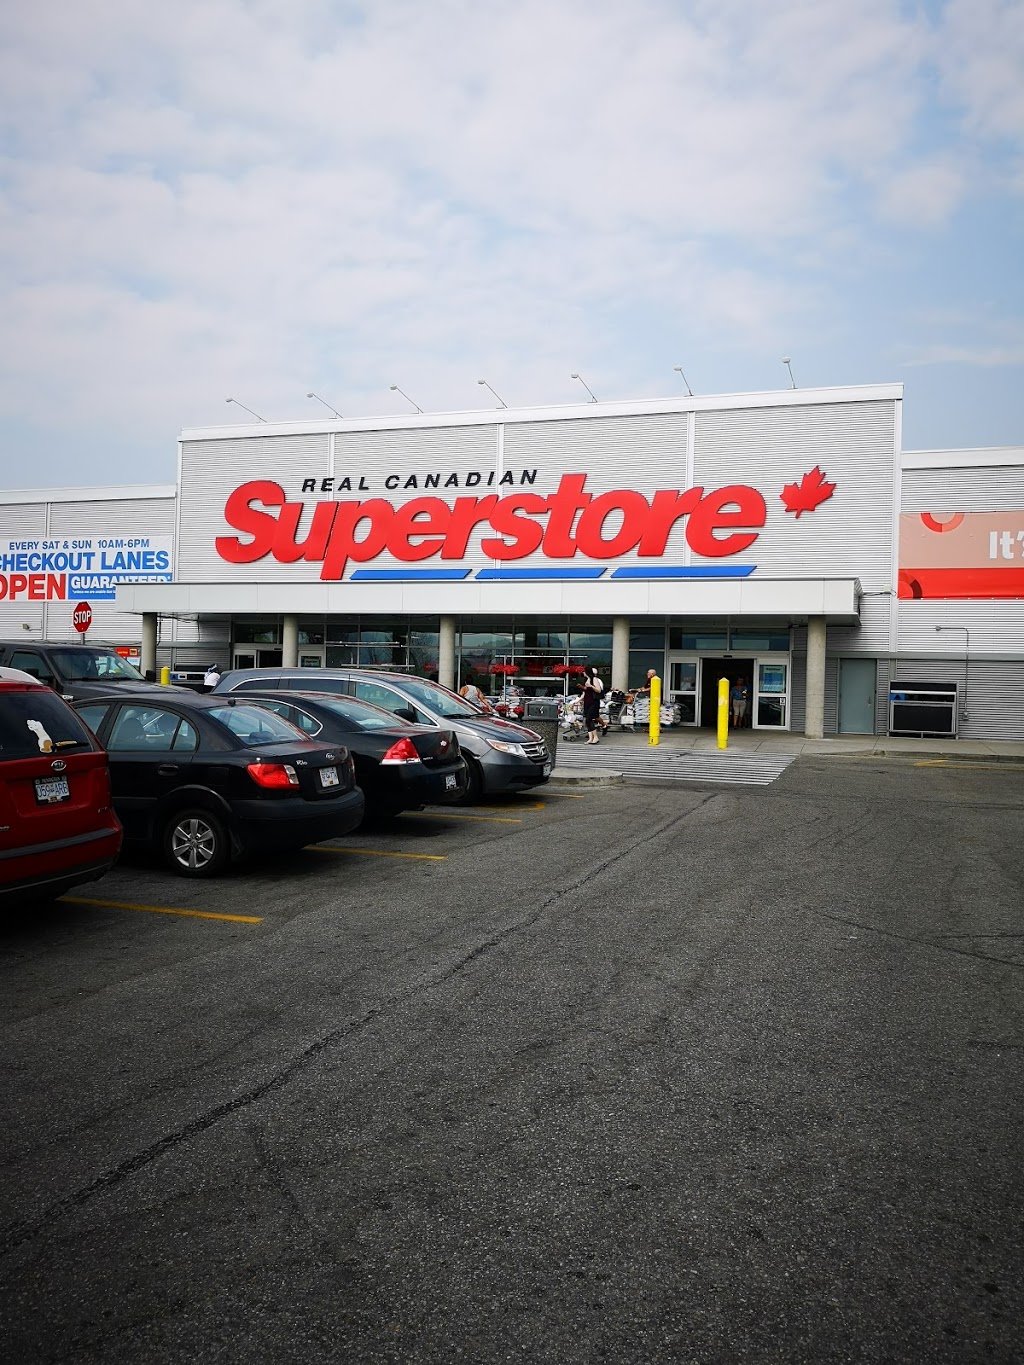 Real Canadian Superstore | bakery | 2210 Main St #3100, Penticton, BC V2A 5H8, Canada | 2504877700 OR +1 250-487-7700